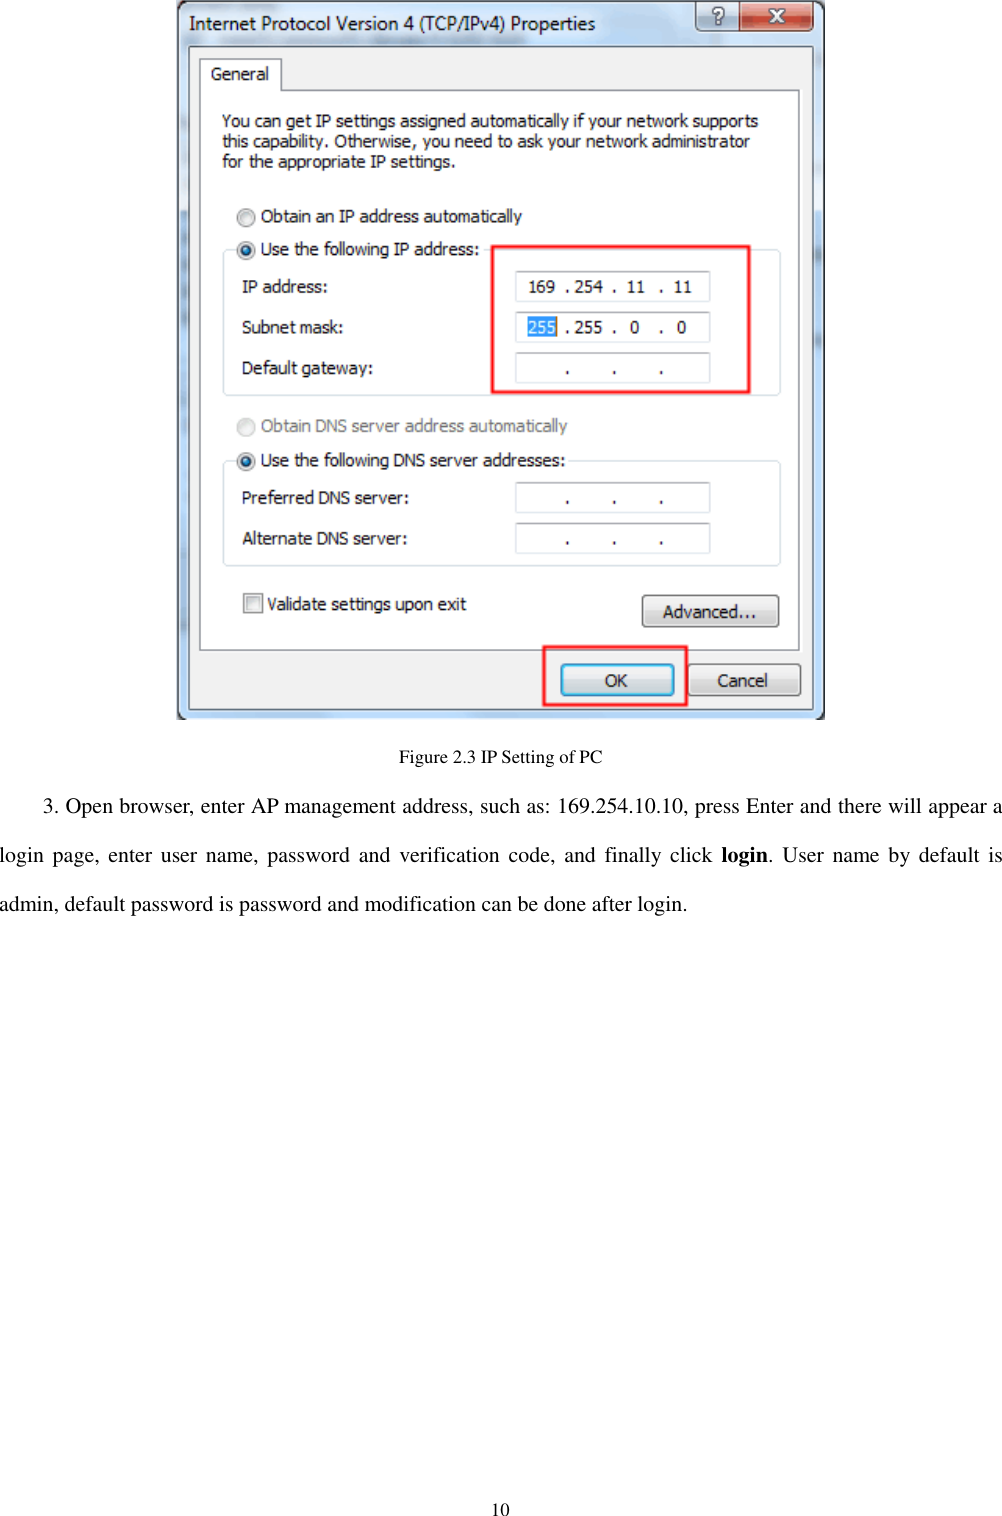 10  Figure 2.3 IP Setting of PC   3. Open browser, enter AP management address, such as: 169.254.10.10, press Enter and there will appear a login page,  enter user name, password and  verification  code, and  finally click  login.  User name by default  is admin, default password is password and modification can be done after login.   